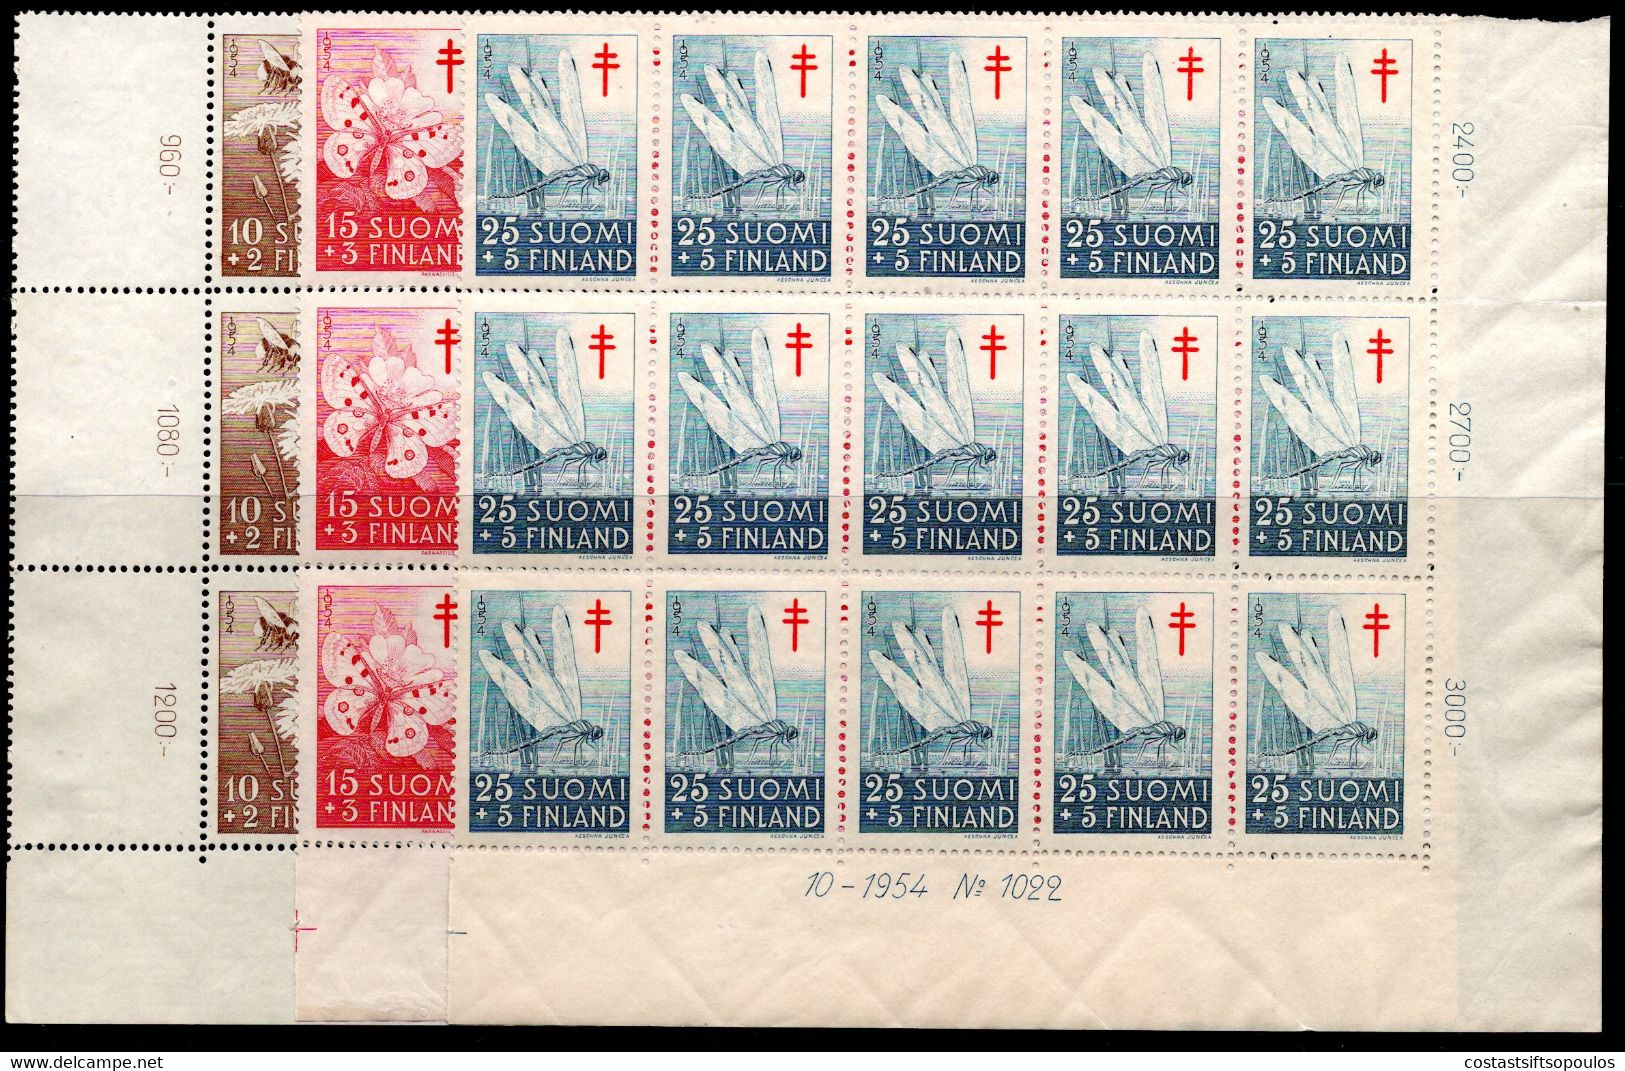 843.FINLAND.1954 INSECTS,MNH IMPRINT BLOCKS OF 15,SC. B126-B128 - Hojas Completas